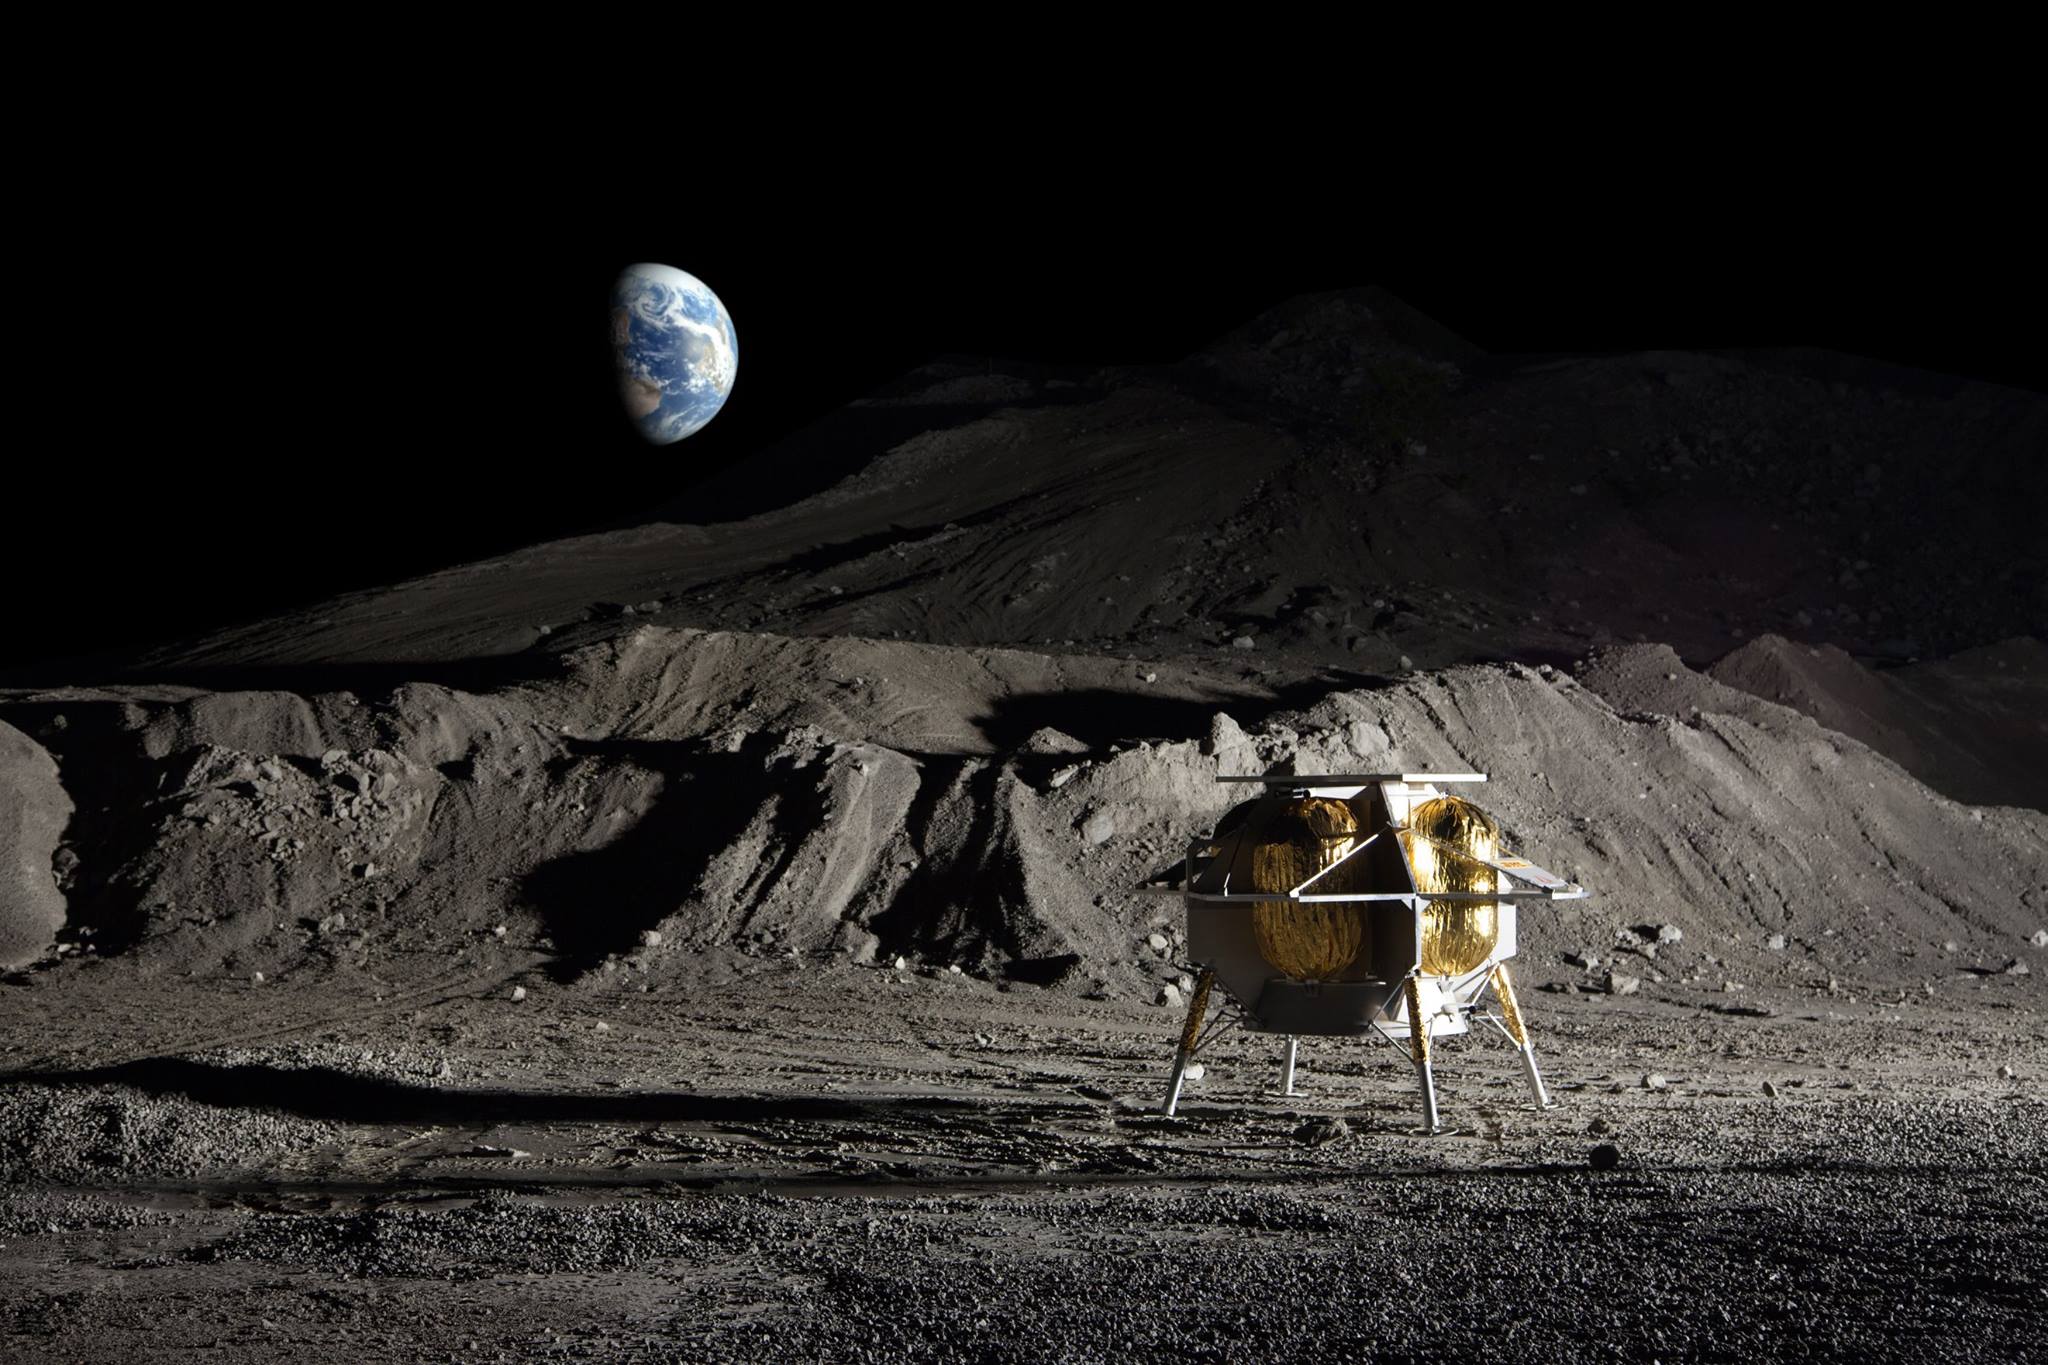  Private Peregrine moon lander will now touch down near 'geologic enigma' 